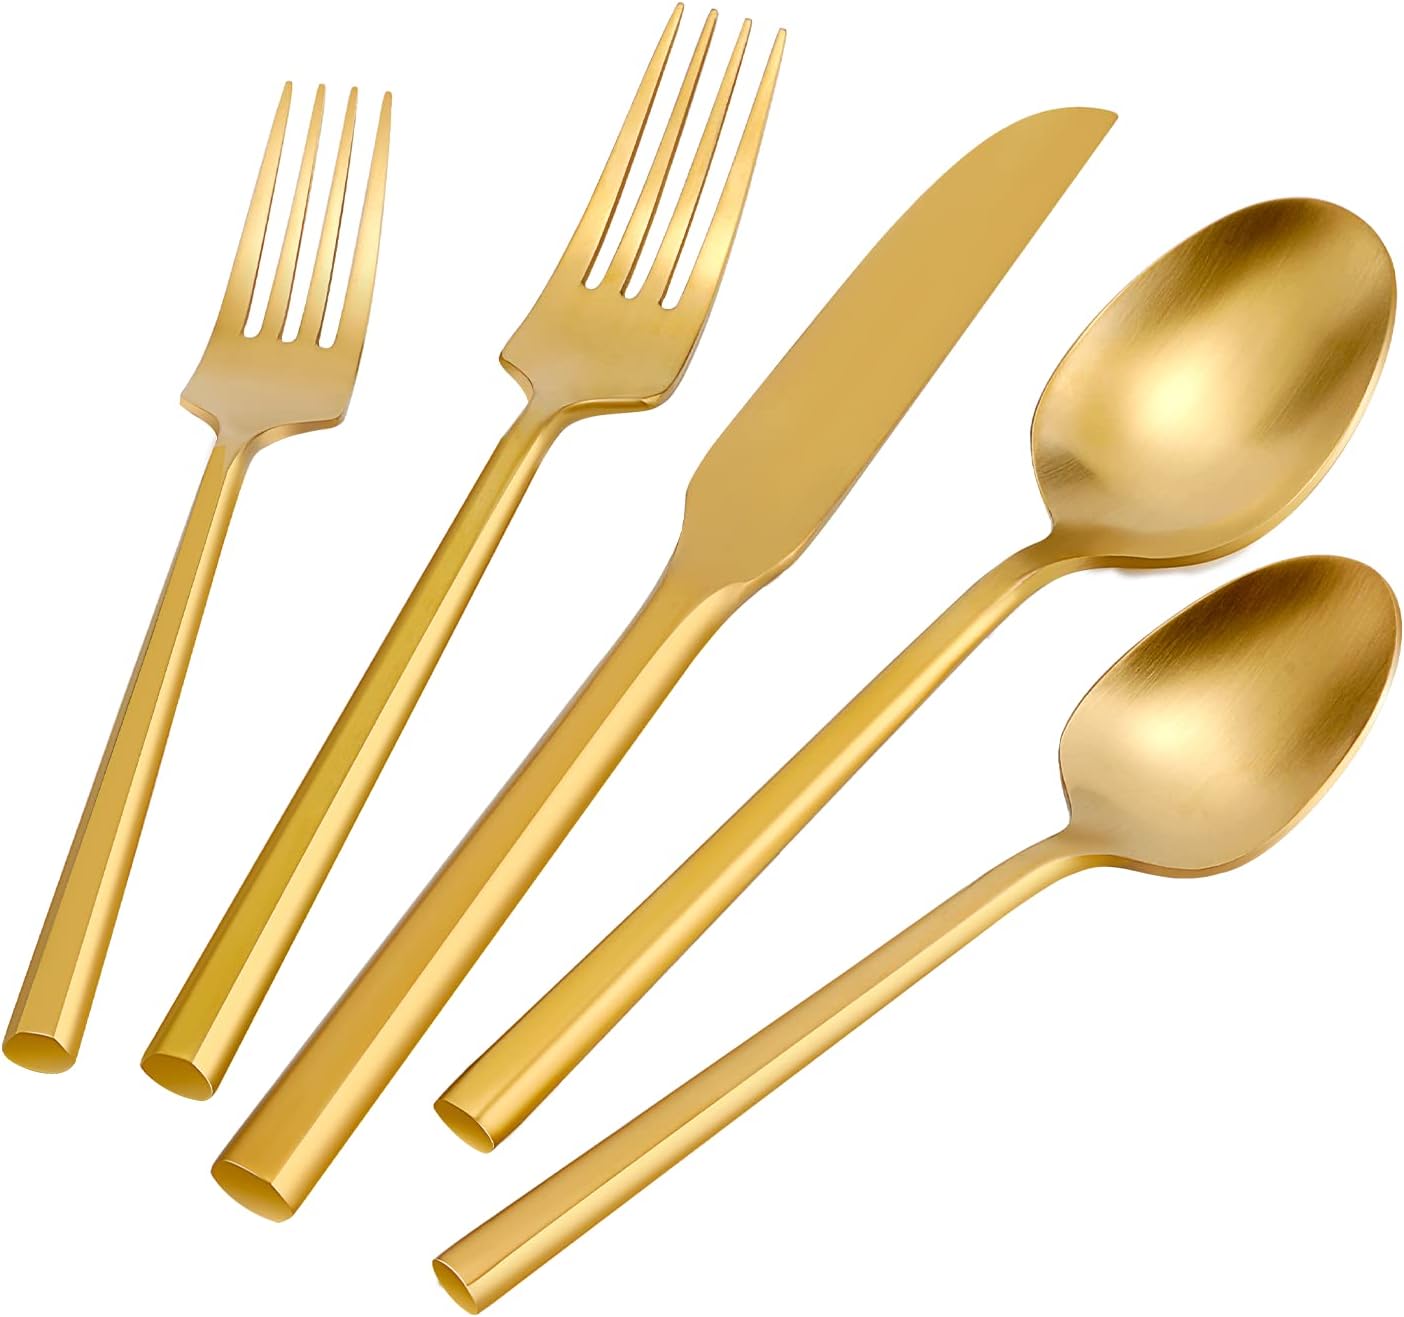 DEACORY Silverware Set Flatware Set Matte Gold Cutlery Set Brushed Brass Heavy Hexagon Handle Stainless Steel 20 Pieces Dishwasher Safe Service for 4